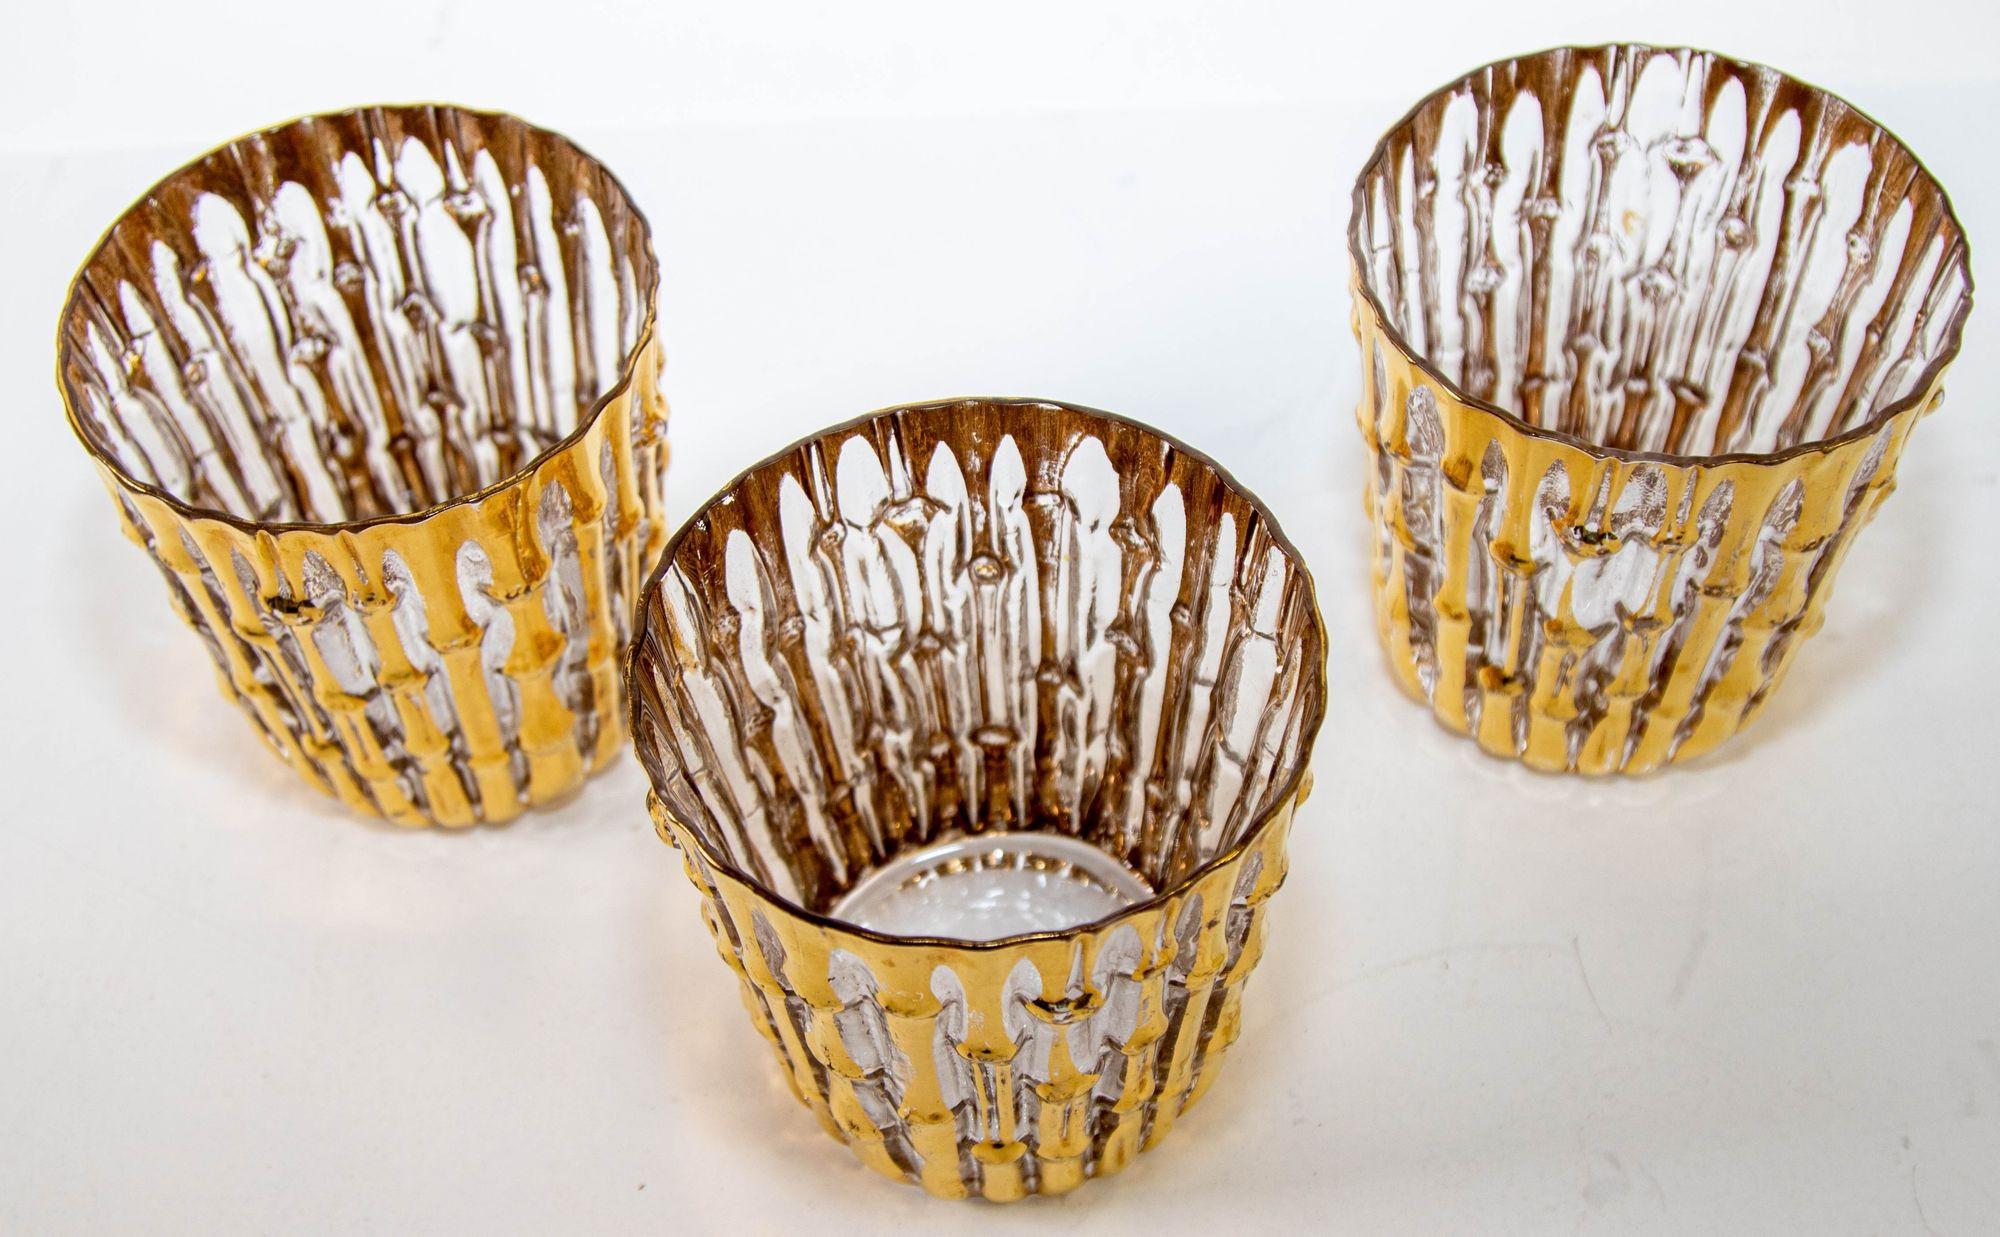 Midcentury metallic 22-Karat Hand Painted Bamboo Rocks Glasses, Set of 3, circa 1965.
Vintage Set of 22-karat gold hand painted bambu pattern rocks glasses by the Imperial Glass Company.
The bamboo pattern is stunning with a raised vertical